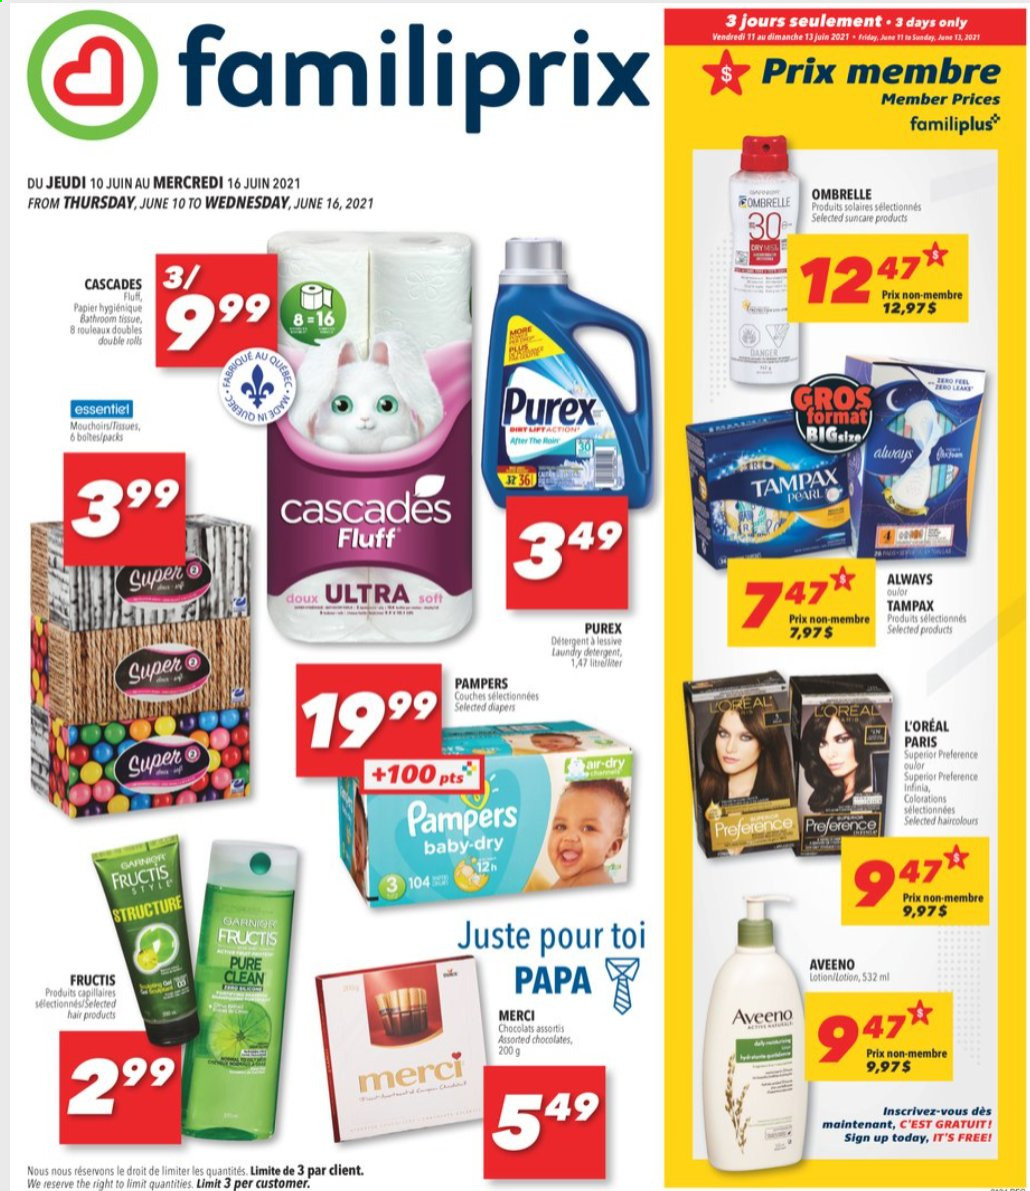 thumbnail - Familiprix Flyer - June 10, 2021 - June 16, 2021 - Sales products - chocolate, Merci, nappies, Aveeno, laundry detergent, Purex, L’Oréal, Fructis, body lotion, Tampax, Pampers. Page 1.